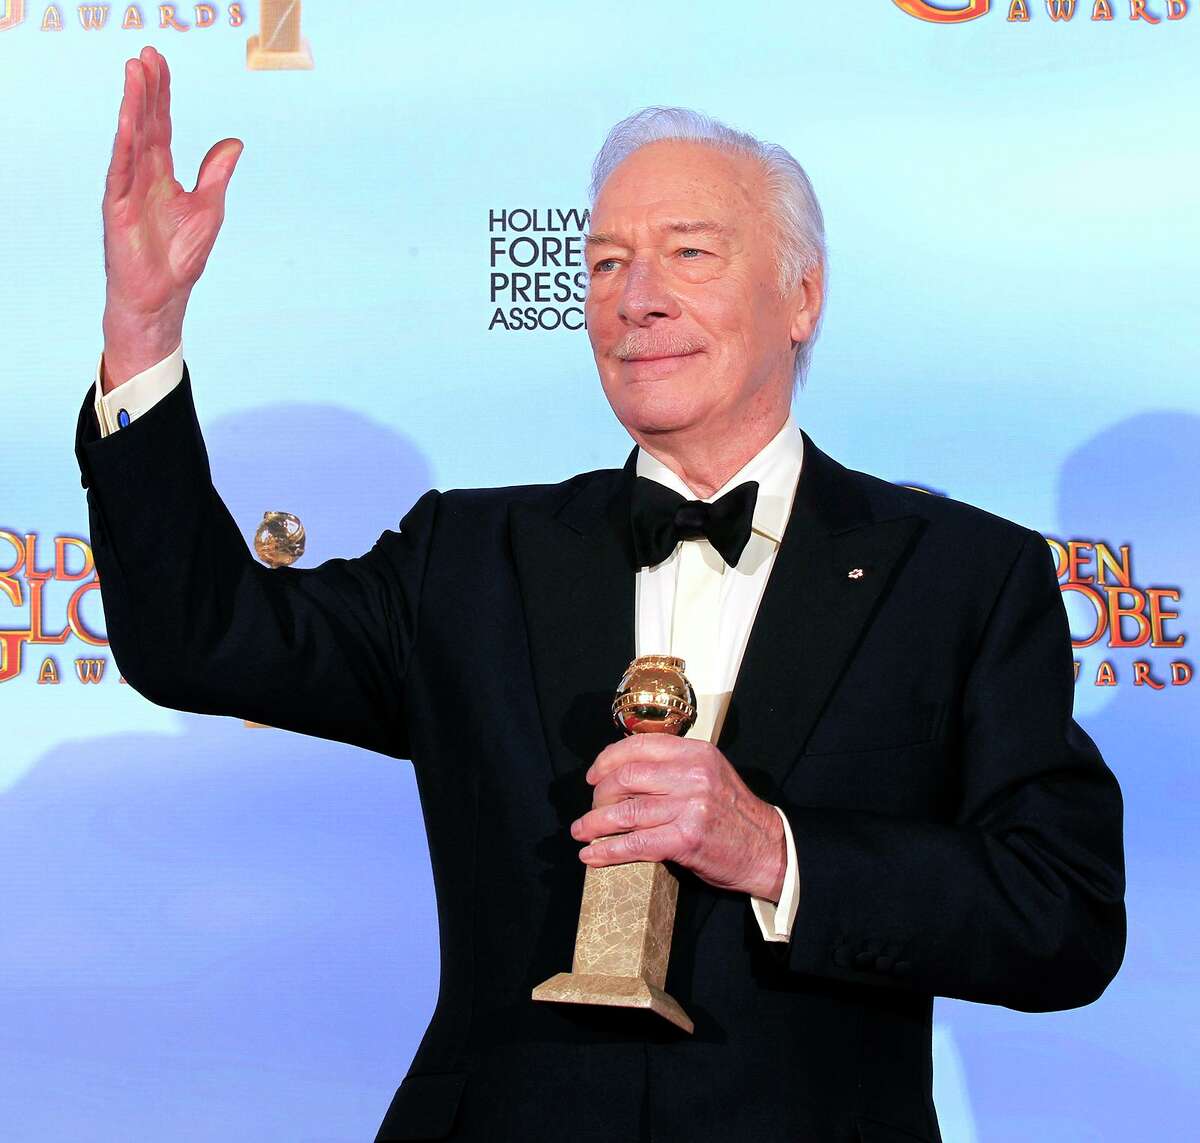 Christopher Plummer with his award backstage at the 69th Annual Golden Globe Awards show at the Beverly Hilton in Beverly Hills, Calif., on Jan. 15, 2012. Plummer died Friday morning at his home in Connecticut with his wife, Elaine Taylor, by his side, said Lou Pitt, his longtime friend and manager. He was 91.